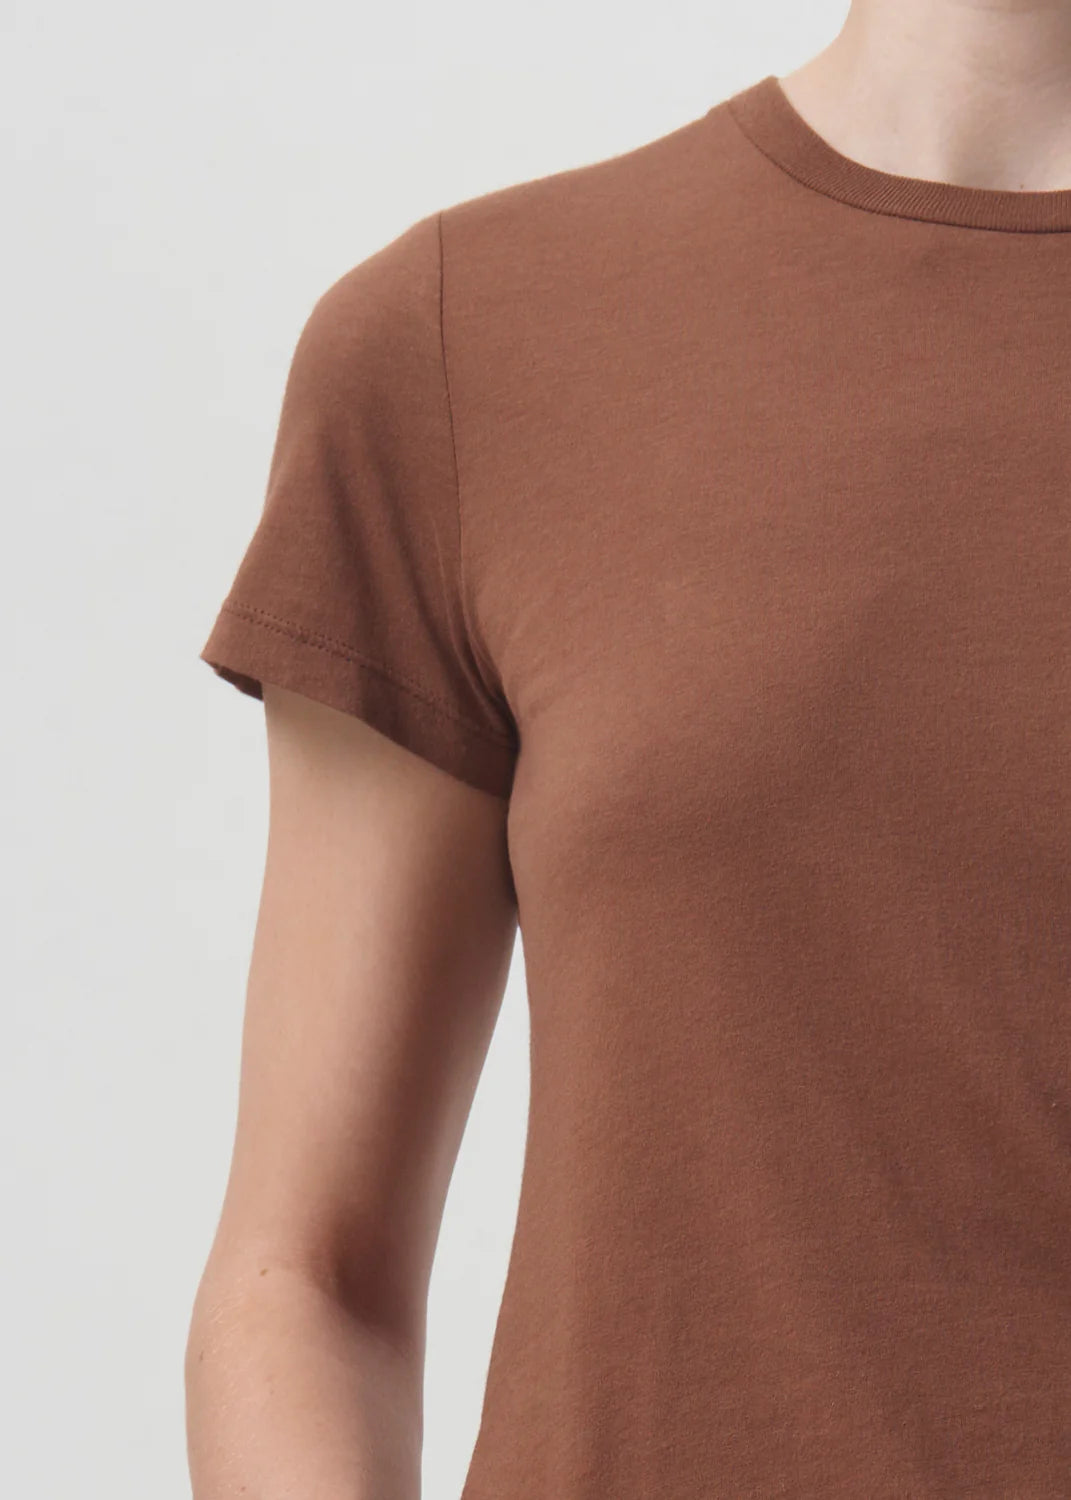 Annise Slim Tee in Beeswax